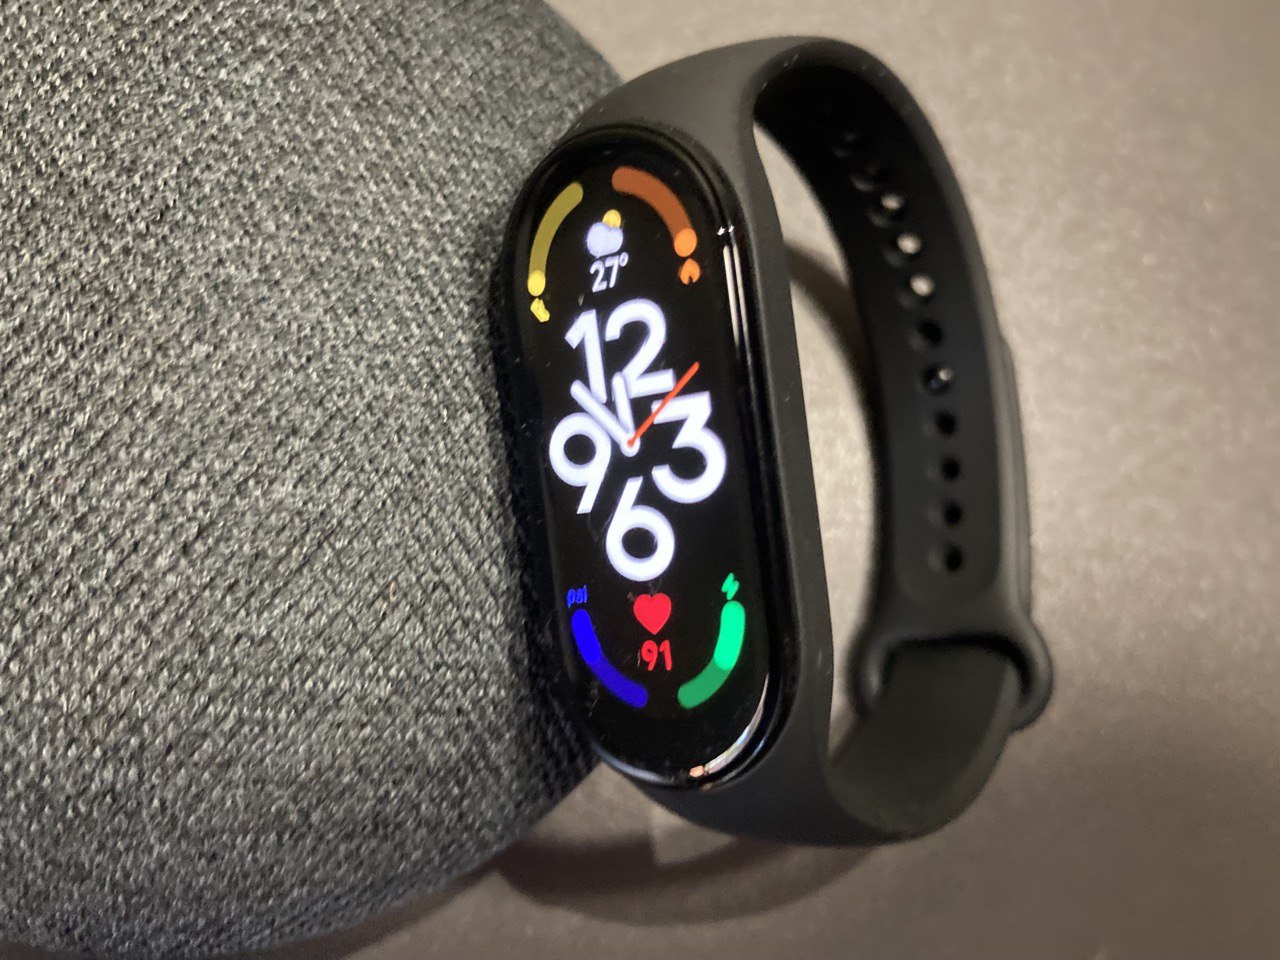 Does the Xiaomi Mi Band 7 have GPS? - Android Authority